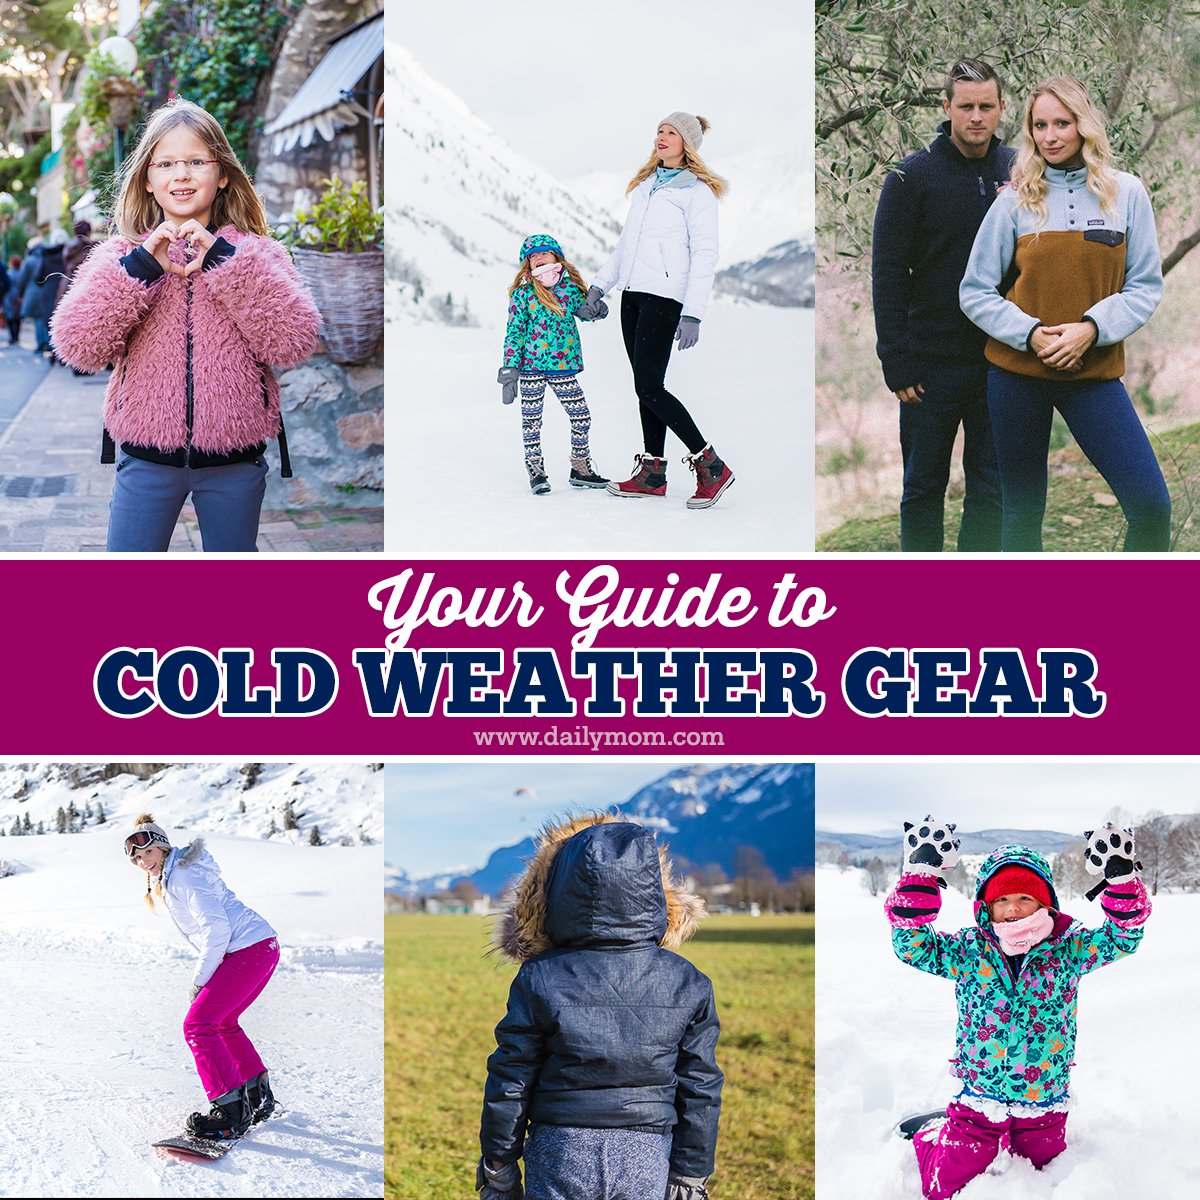 https://dailymom.com/portal/wp-content/uploads/2018/01/Your-Guide-to-Cold-Weather-Gear.jpg